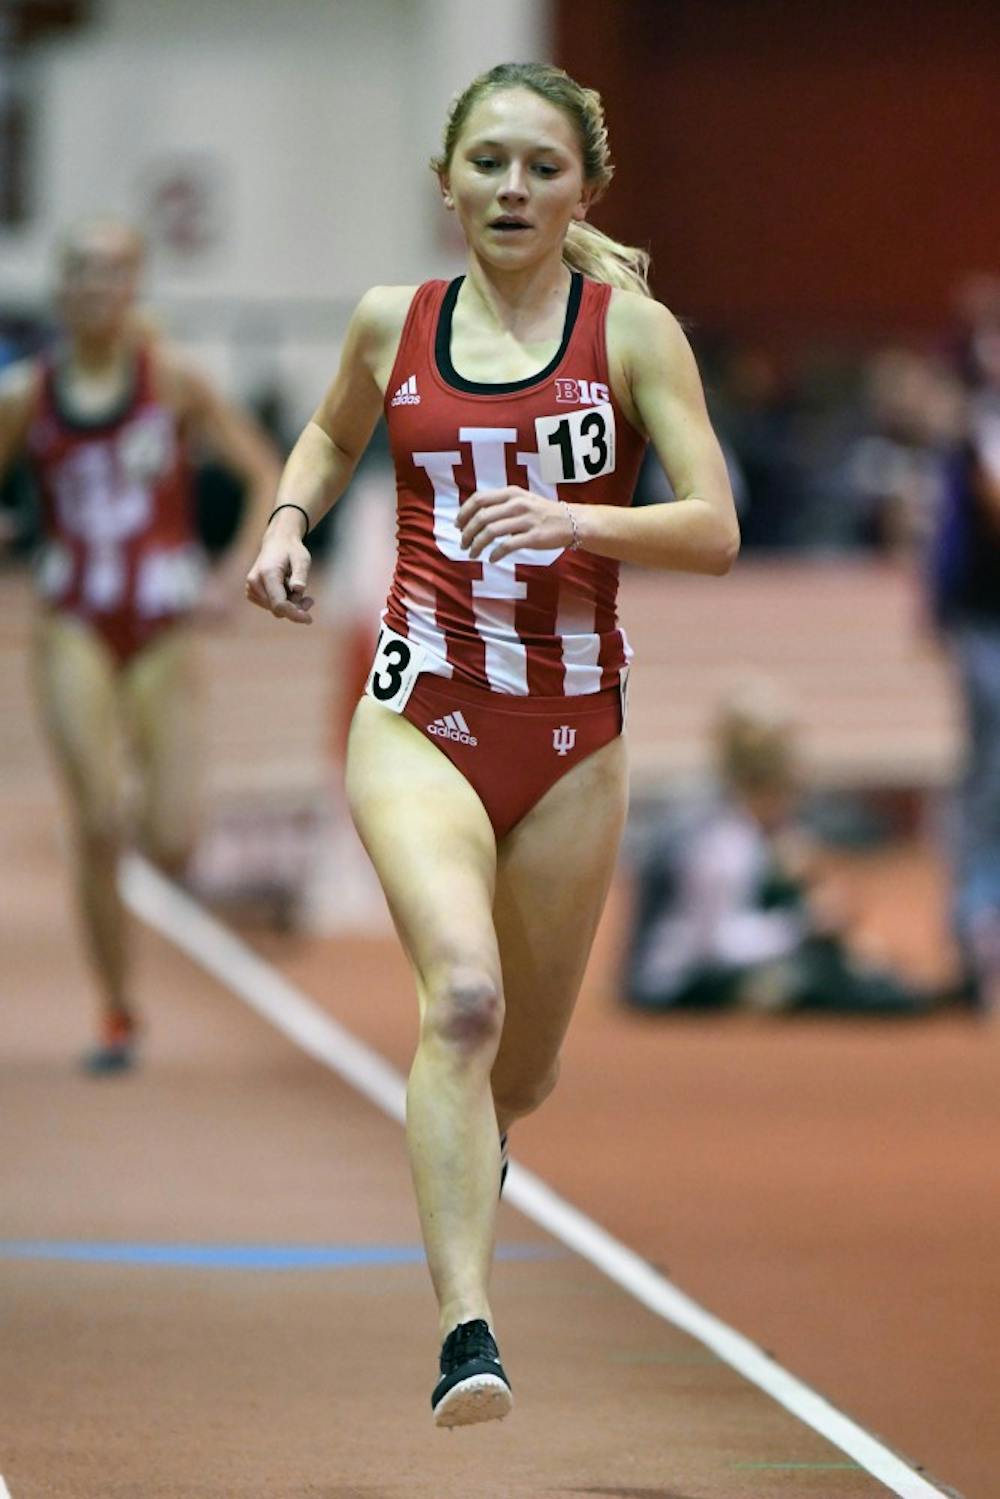 Junior Katherine Receveur races the 3,000-meter at the Gladstein Invitational. Receveur finished first in the event with a time of 9:18.47. She and the Hoosiers broke event and school records at the Penn Relays this past weekend.&nbsp;